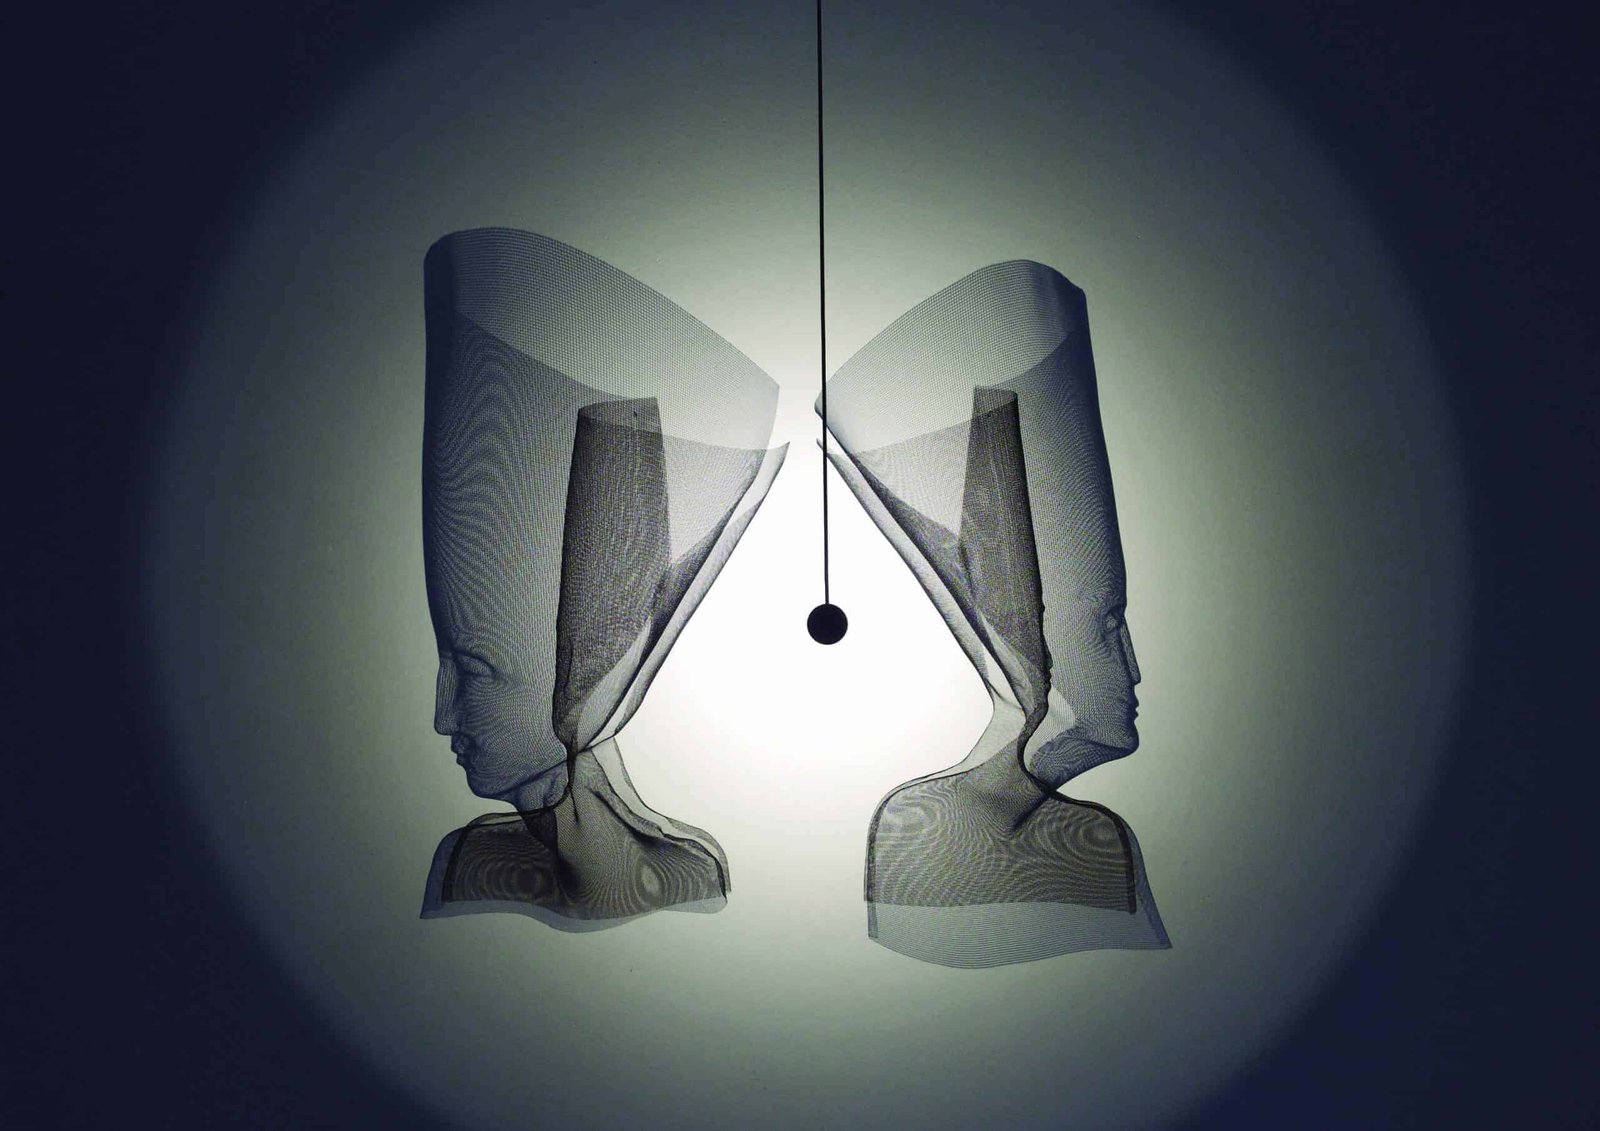 Two heads hanging from a lamp in a dimly lit room.